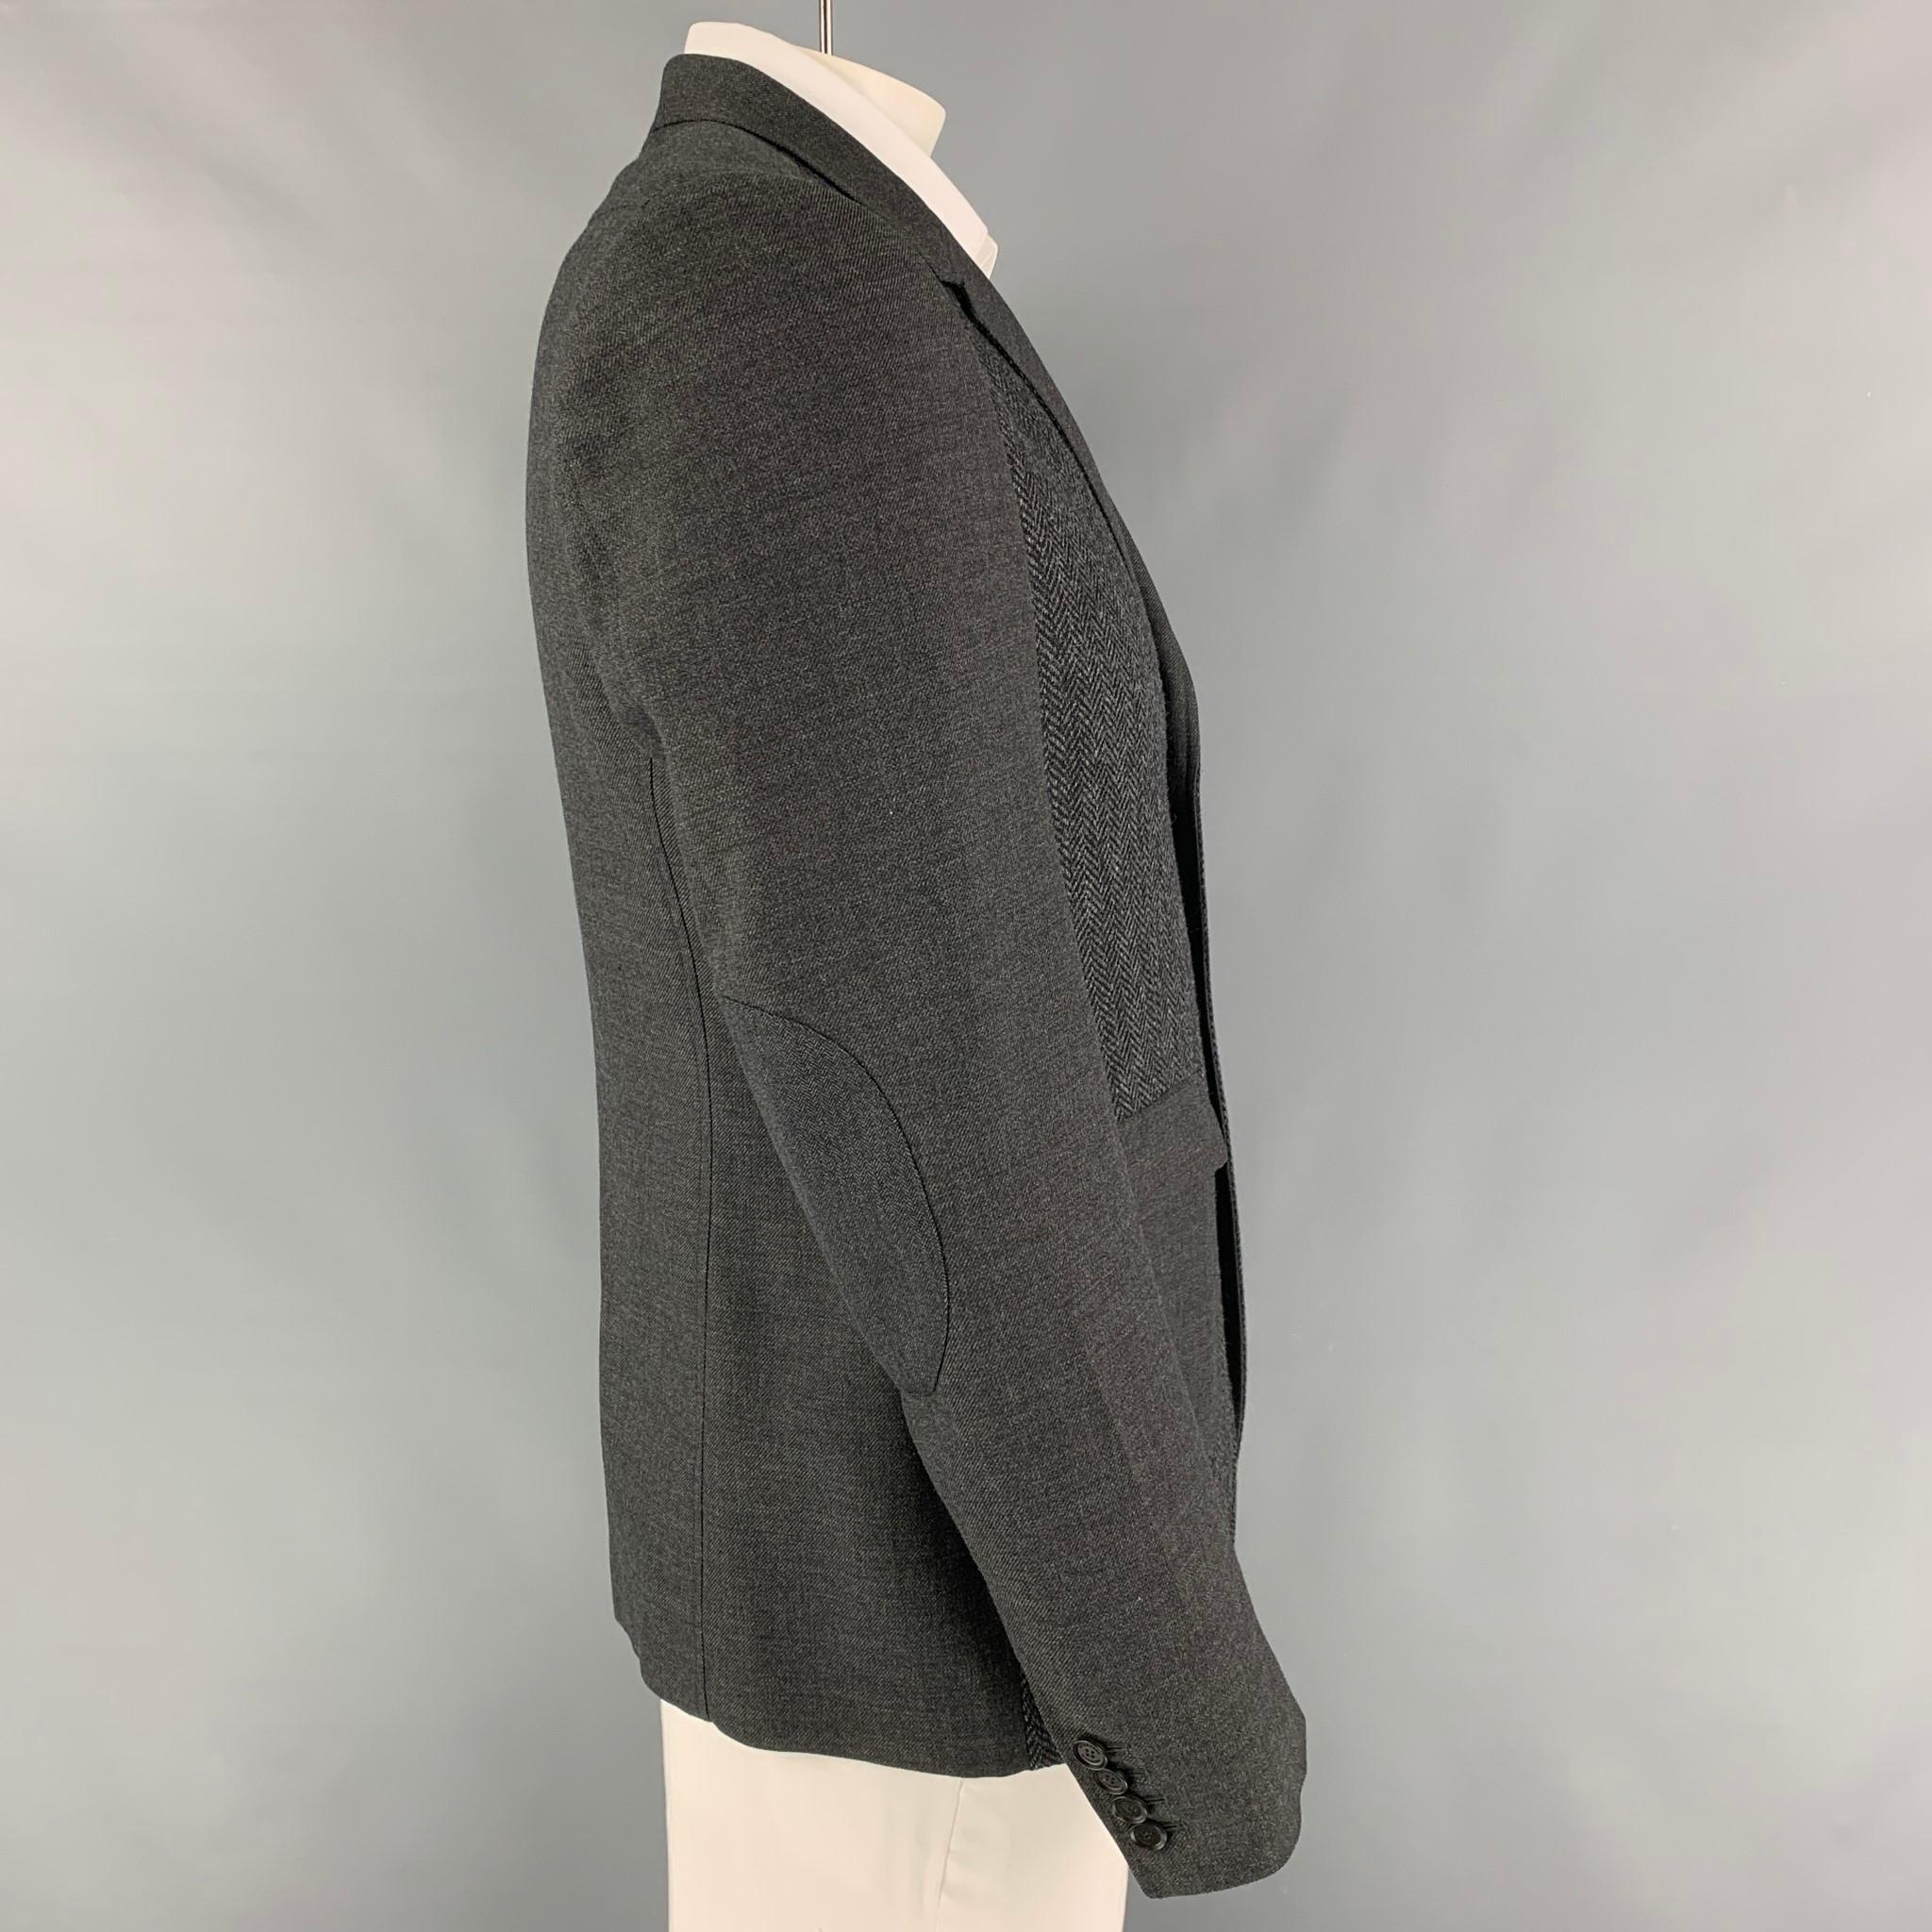 BURBERRY PRORSUM sport coat comes in a grey virgin wool with a full liner featuring a notch lapel, elbow patches, single back vent, flap pockets, and a two button closure. Made in Italy. 

Excellent Pre-Owned Condition.
Marked: